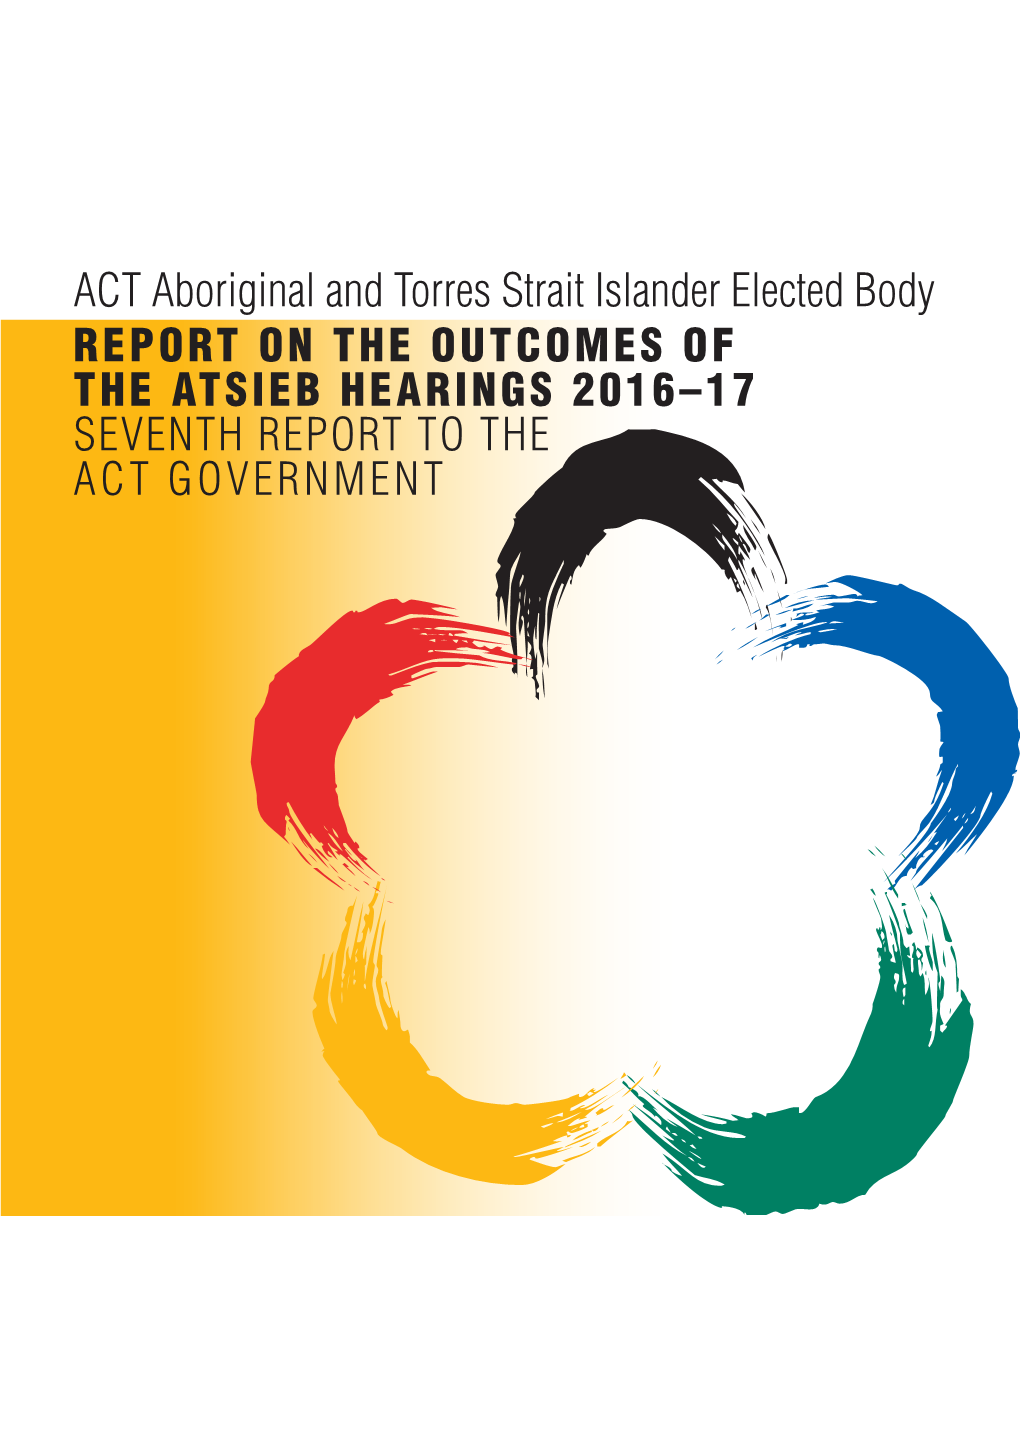 Report on the Outcomes of the ATSIEB Hearings 2015 Sixth Report to the ACT Government